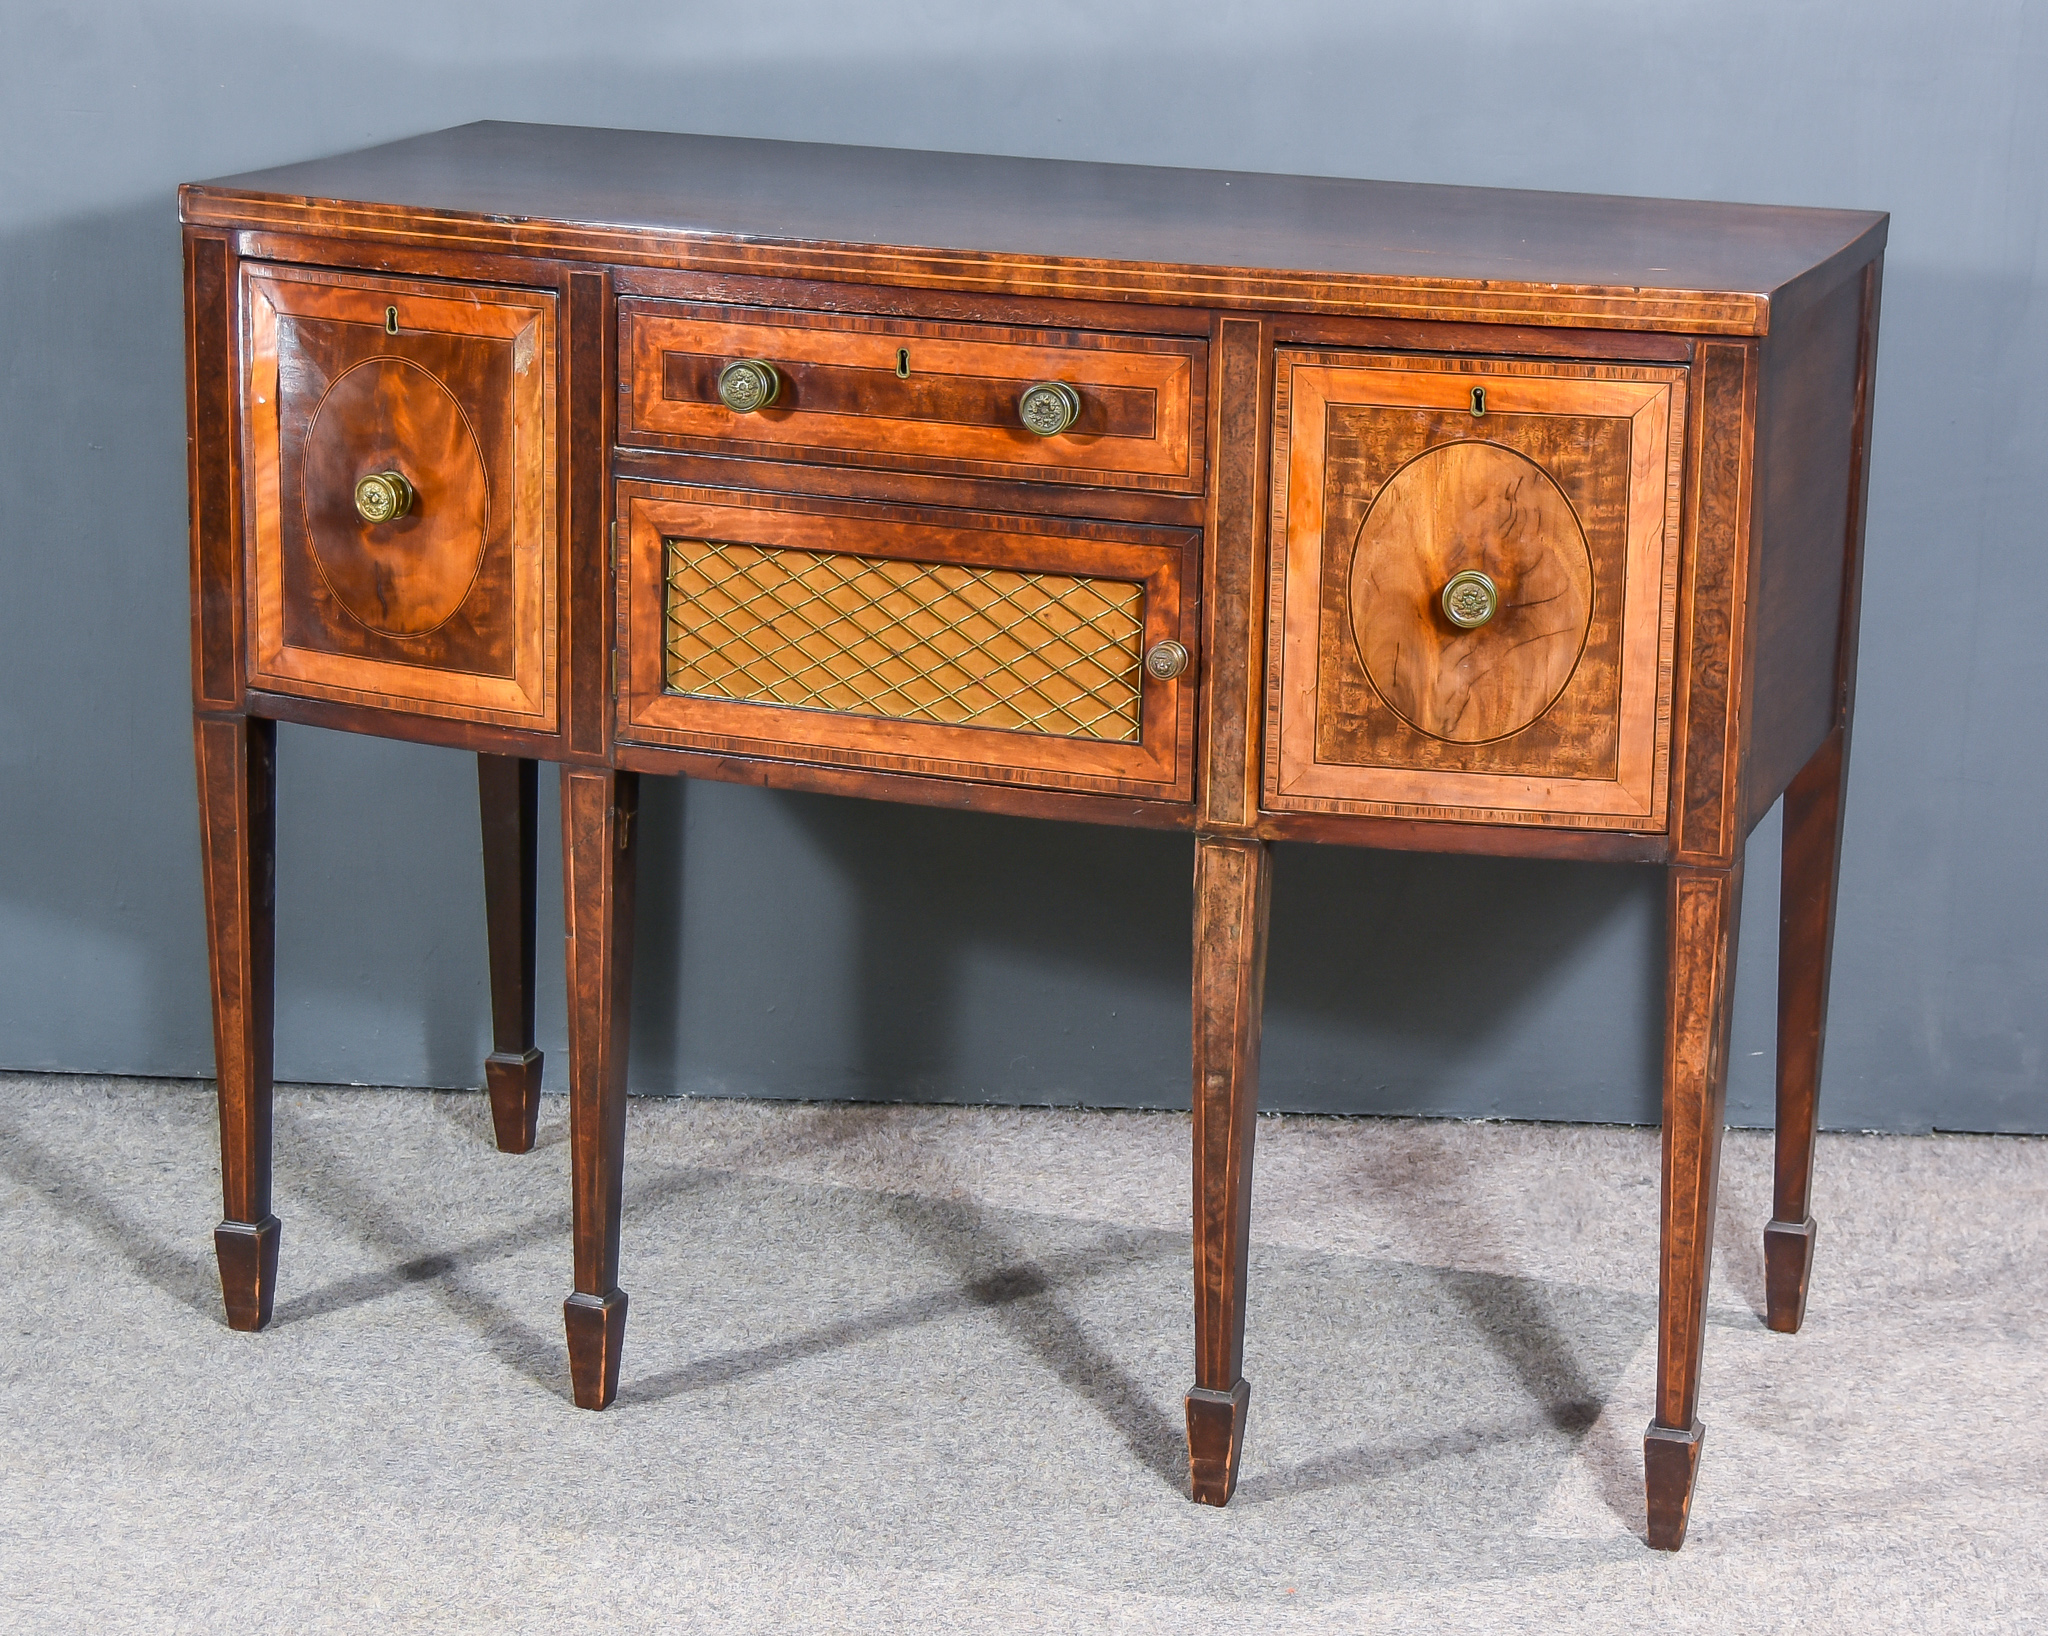 A George III Mahogany Bow Front Sideboard, with plain top, the front inlaid with stringings and